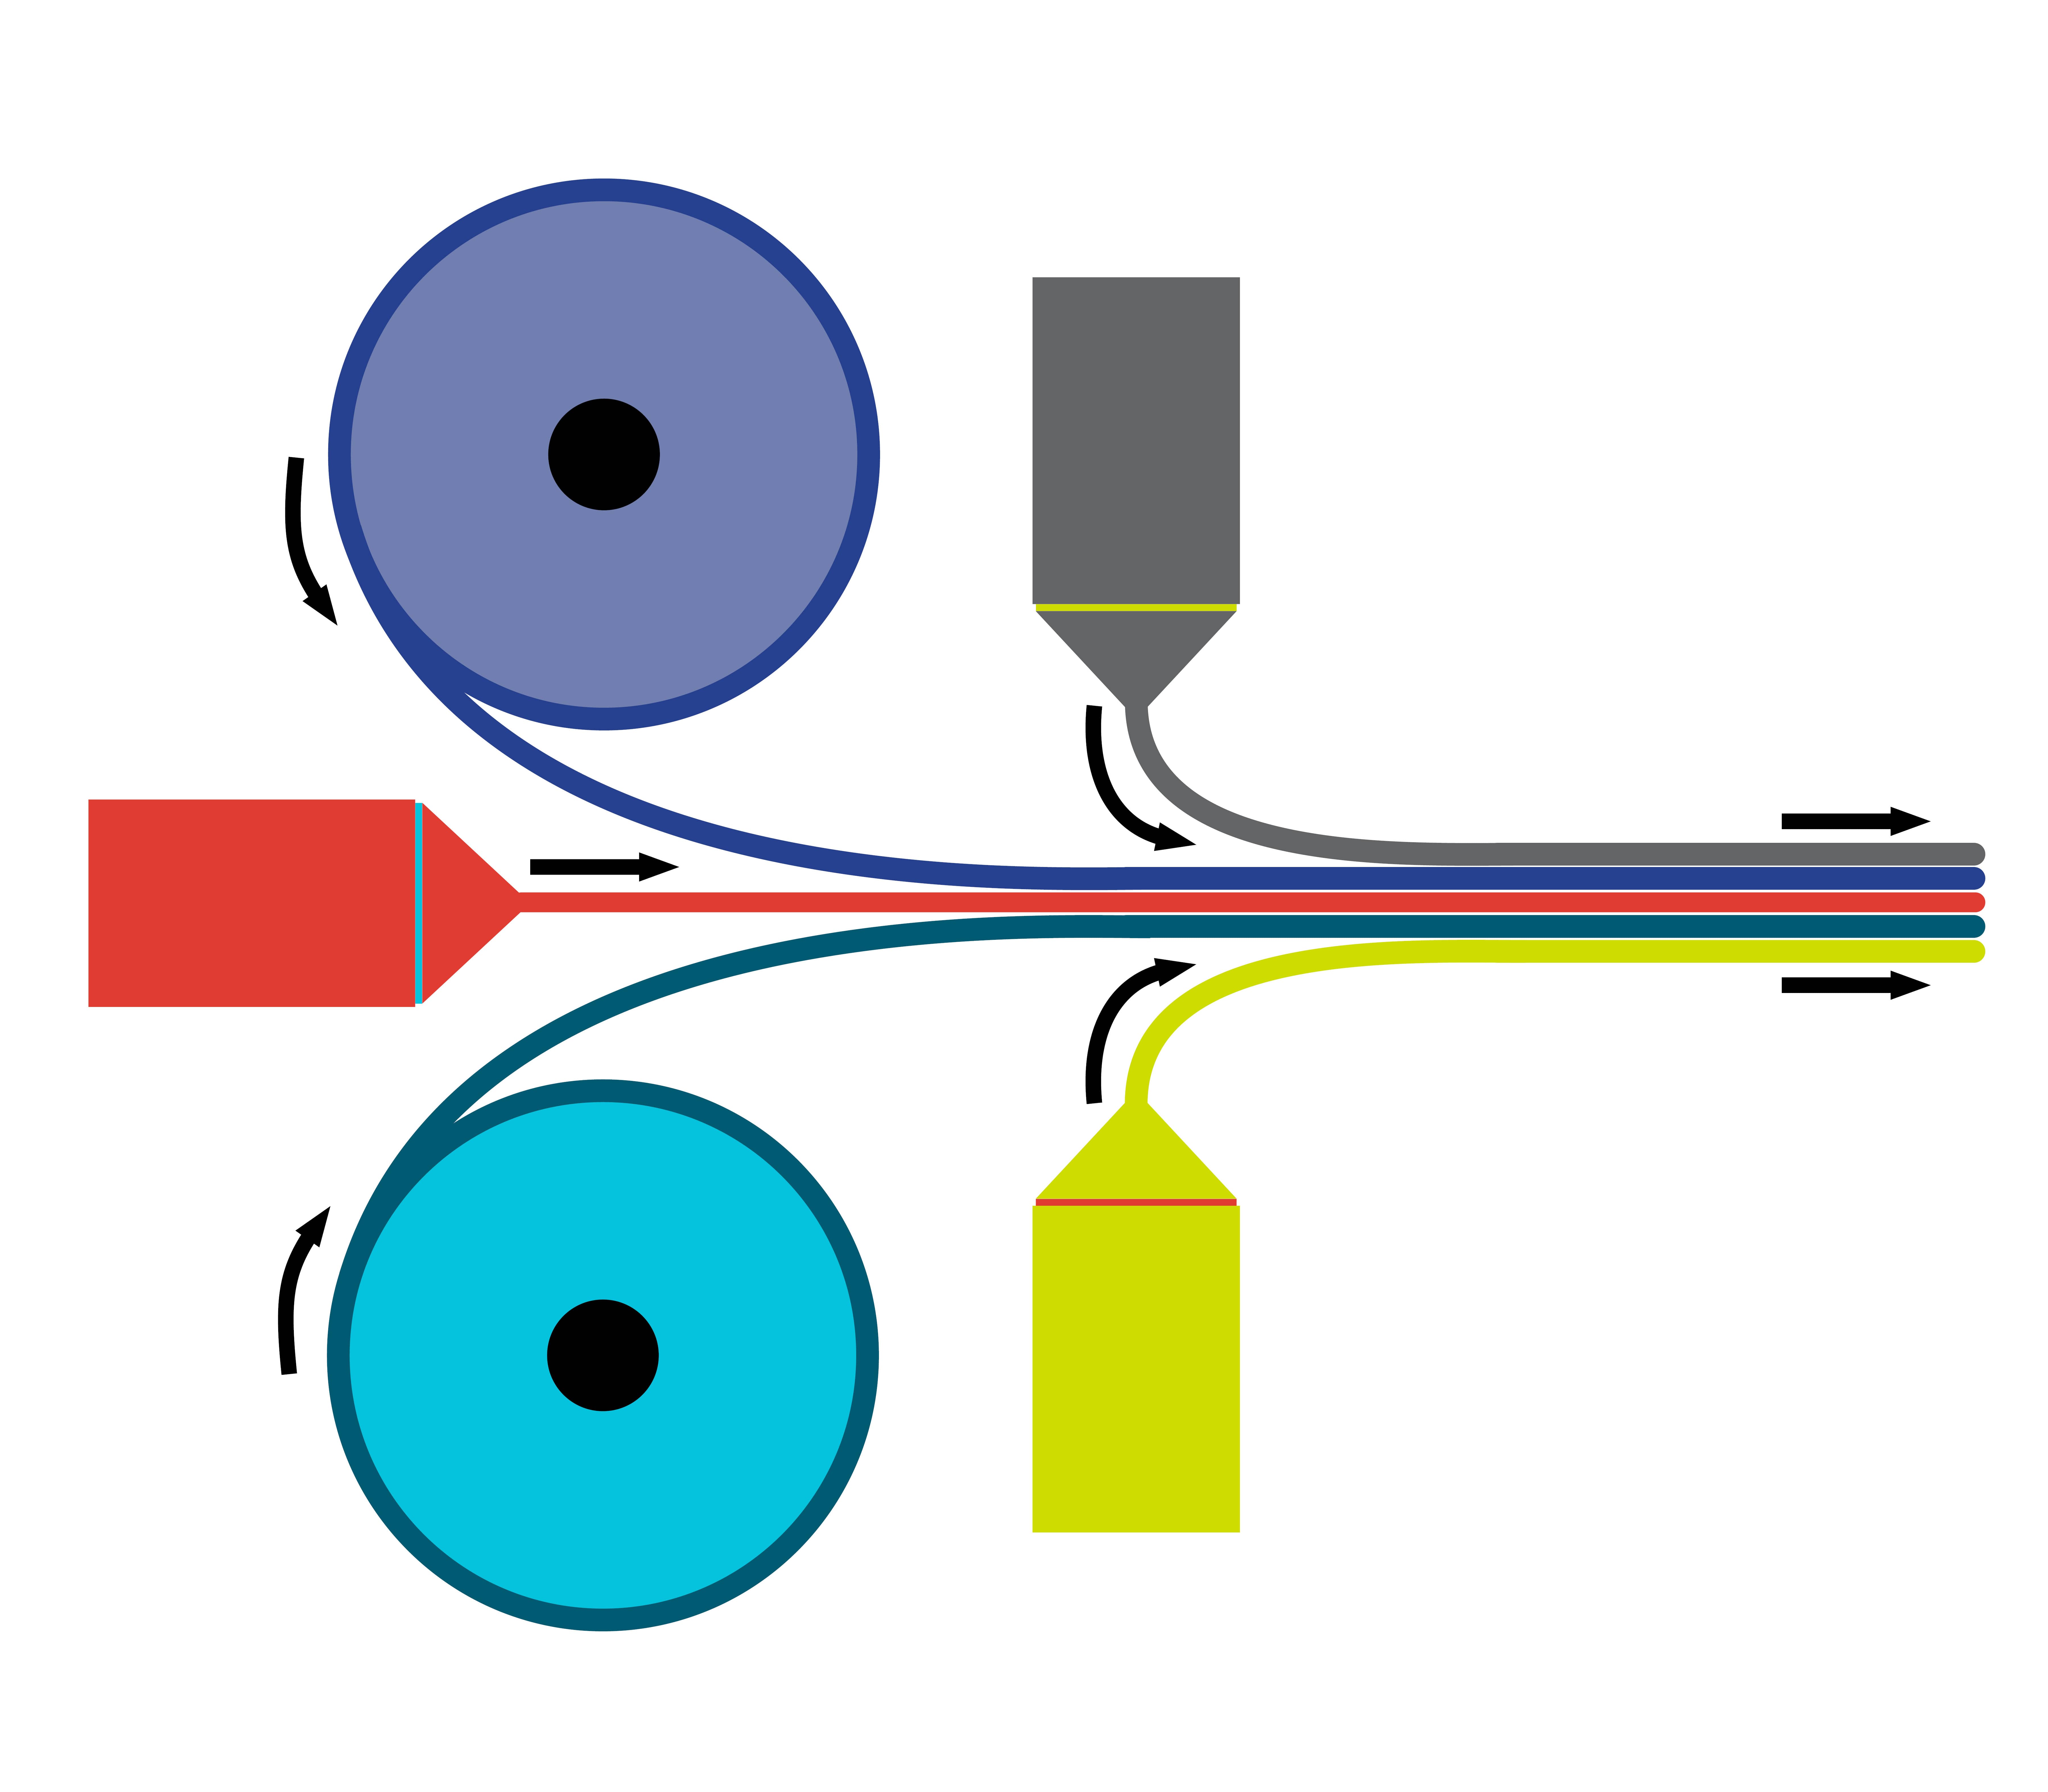 Simple graphic drawing of tandem extrusion process